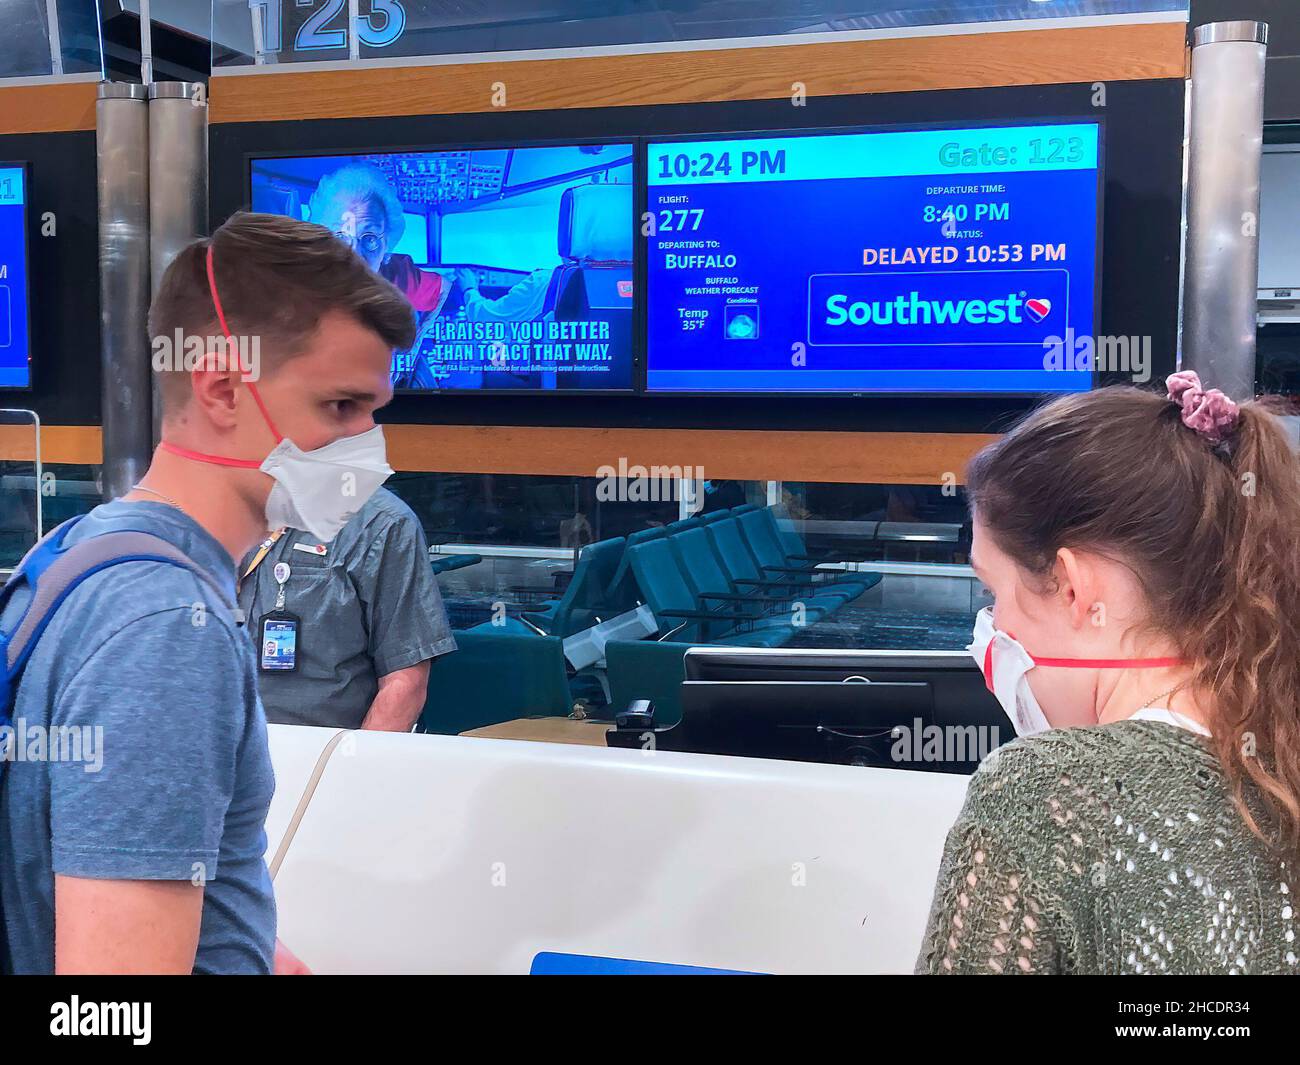 A couple wearing protective face masks are seen in front of a delayed flight sign at Orlando International Airport two days after Christmas. Due to flight crew shortages as a result of the COIVD-19 Omicron variant and due to other reasons, 760 flights to, from or within the US were canceled, and another 930 were delayed on December 27, 2021. Due to flight crew shortages as a result of the COIVD-19 Omicron variant and due to other reasons, 760 flights to, from or within the US were canceled and another 930 were delayed on December 27, 2021. Stock Photo